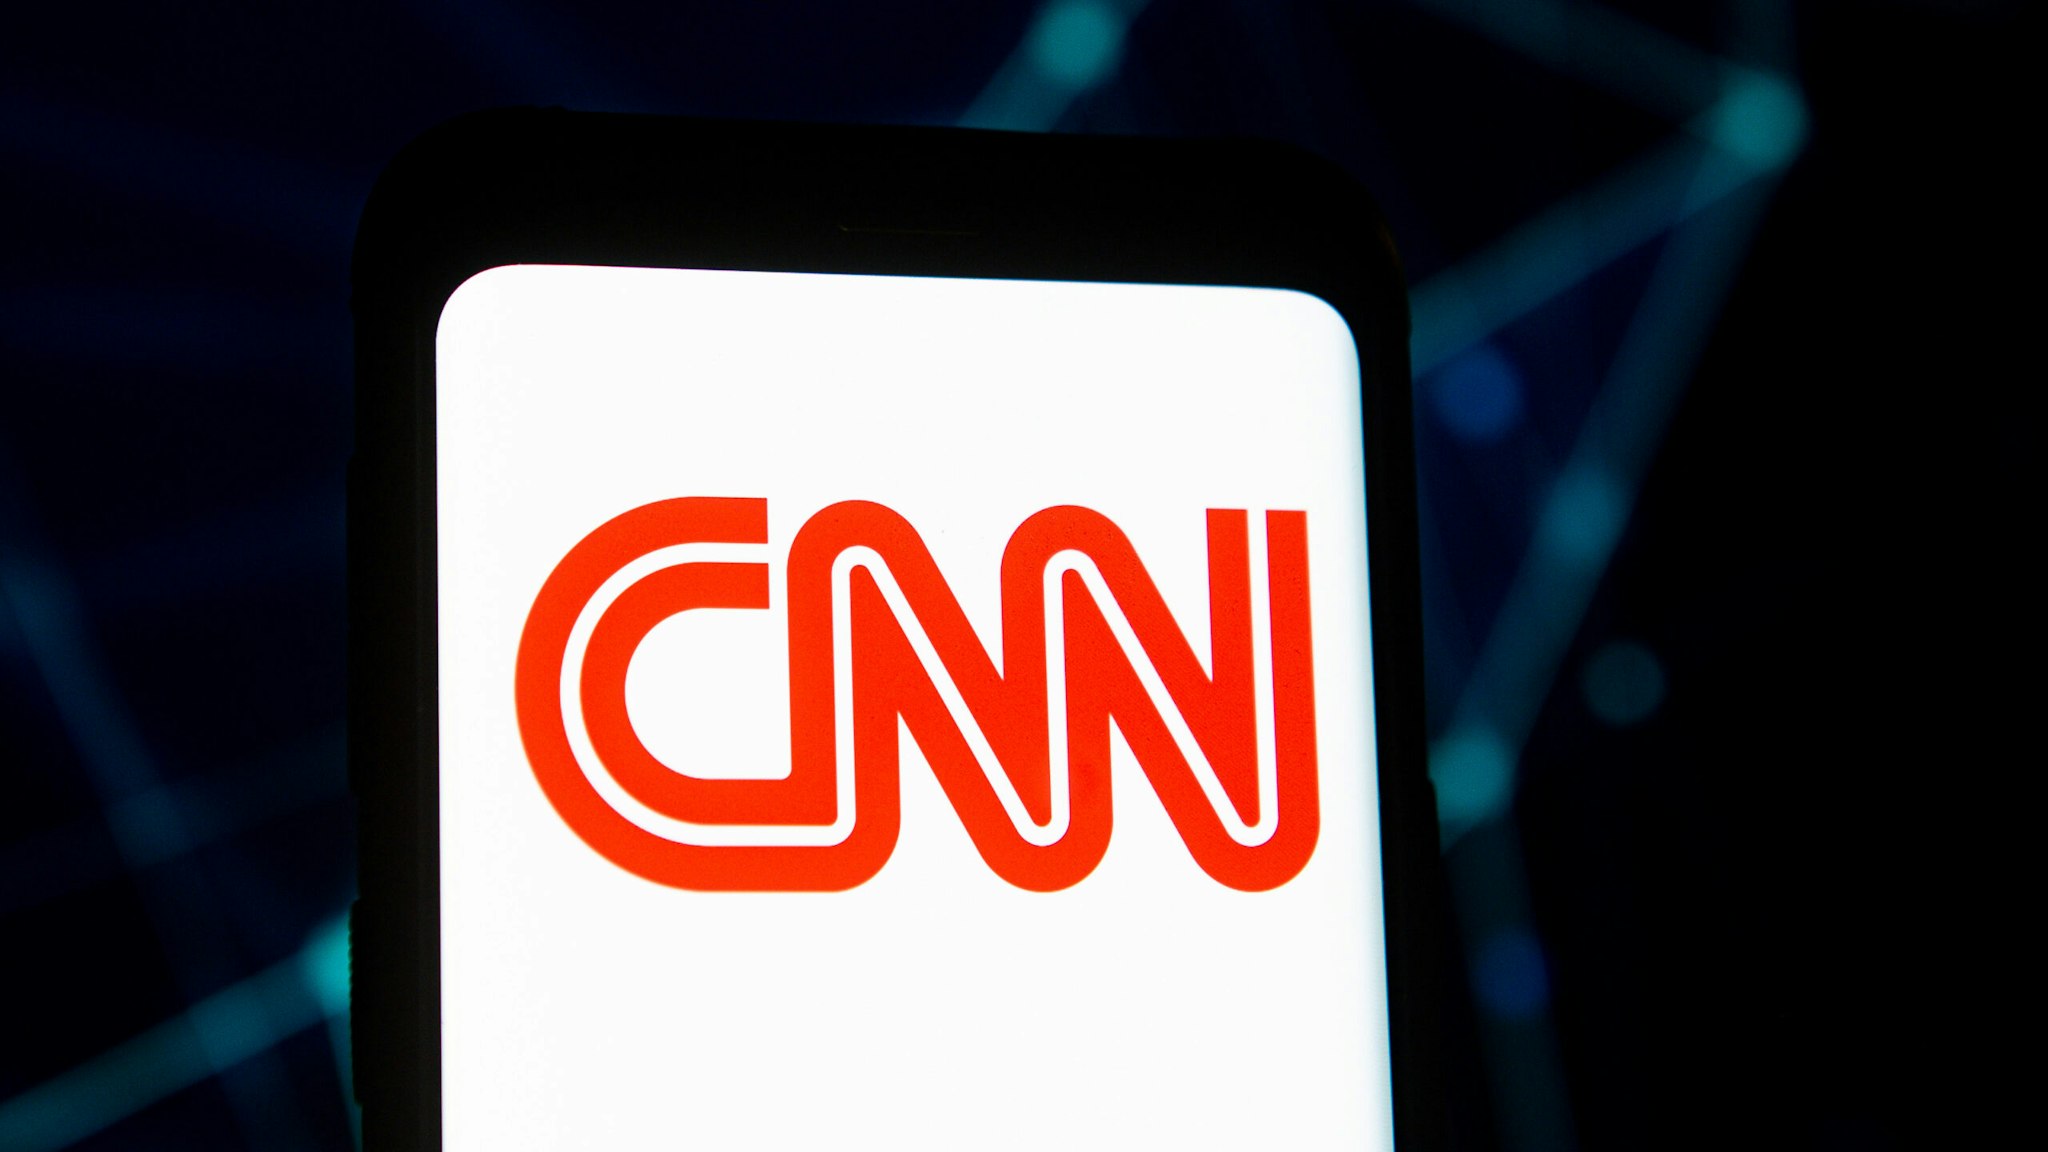 POLAND - 2020/03/23: In this photo illustration a CNN logo seen displayed on a smartphone.